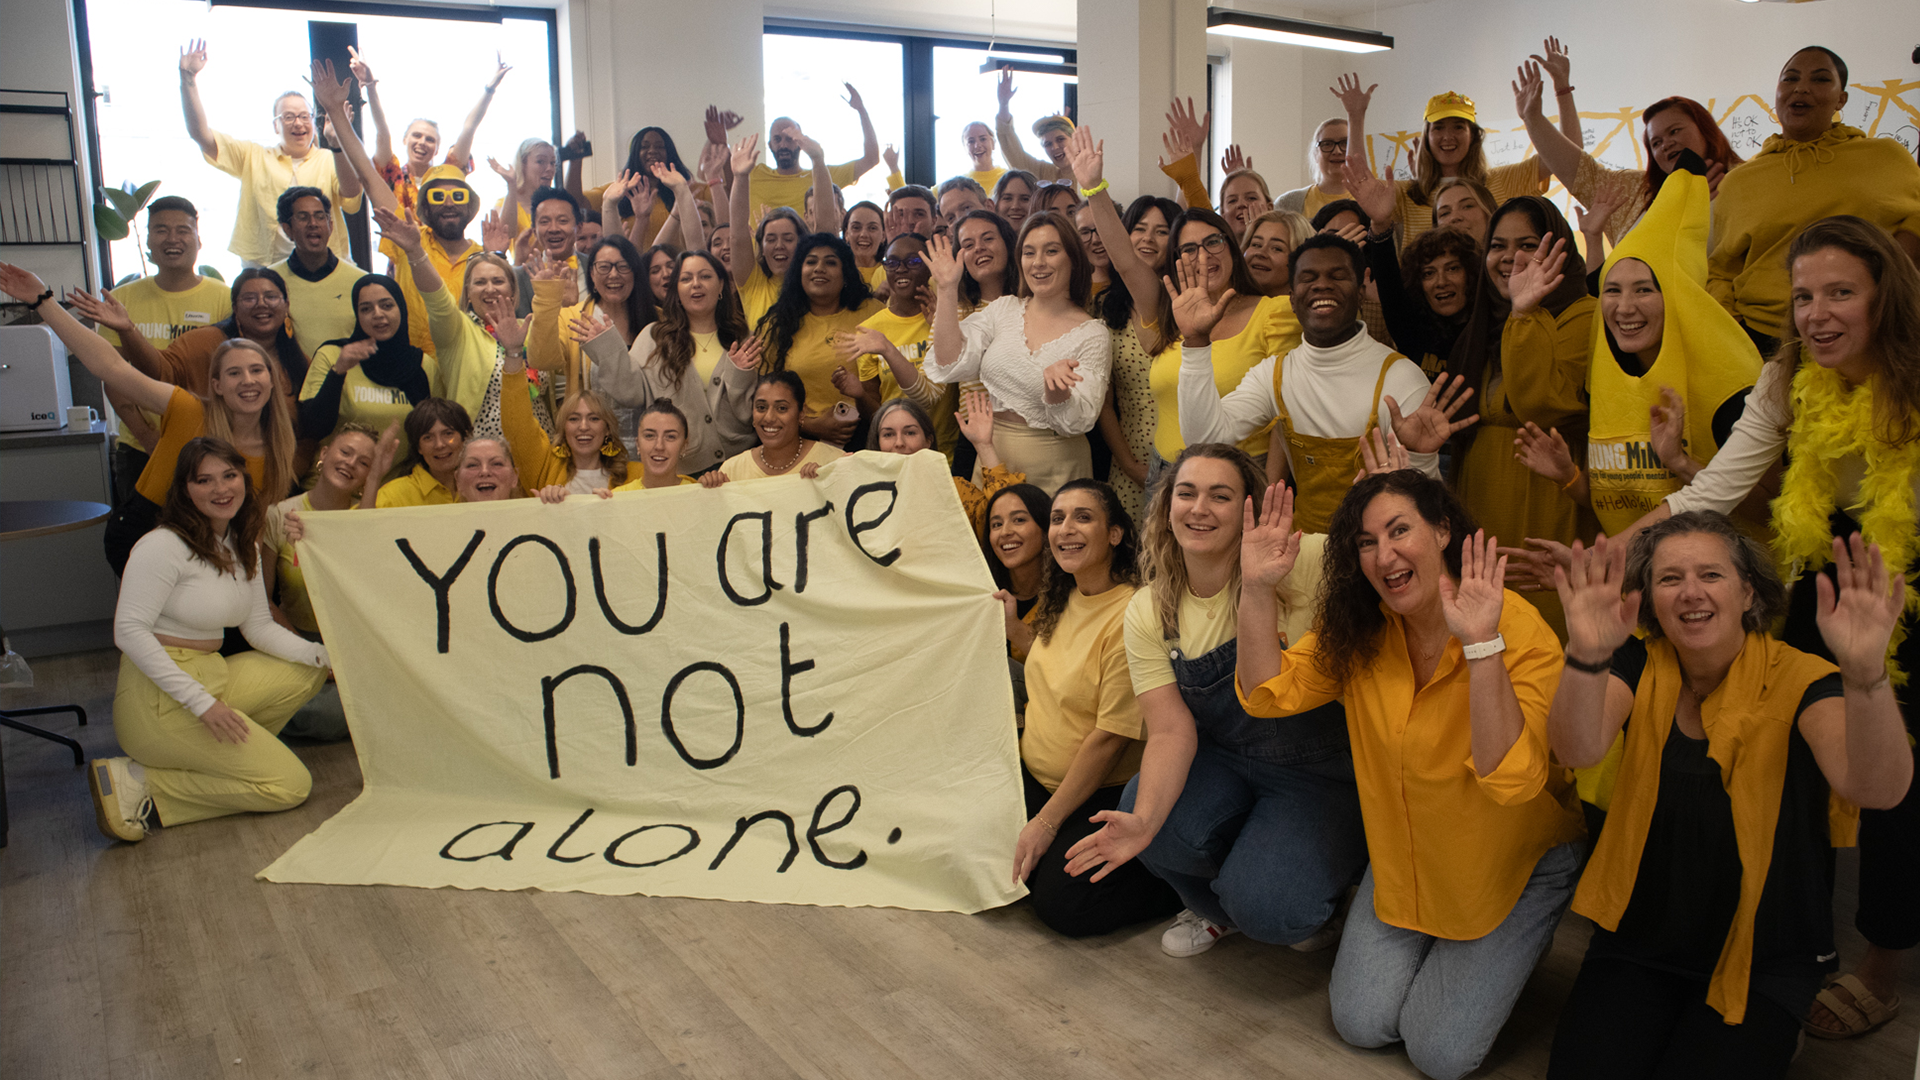 YoungMinds staff all wearing yellow for #HelloYellow 2023, posing with their hands in the air. They are holding a sign saying "You are not alone."